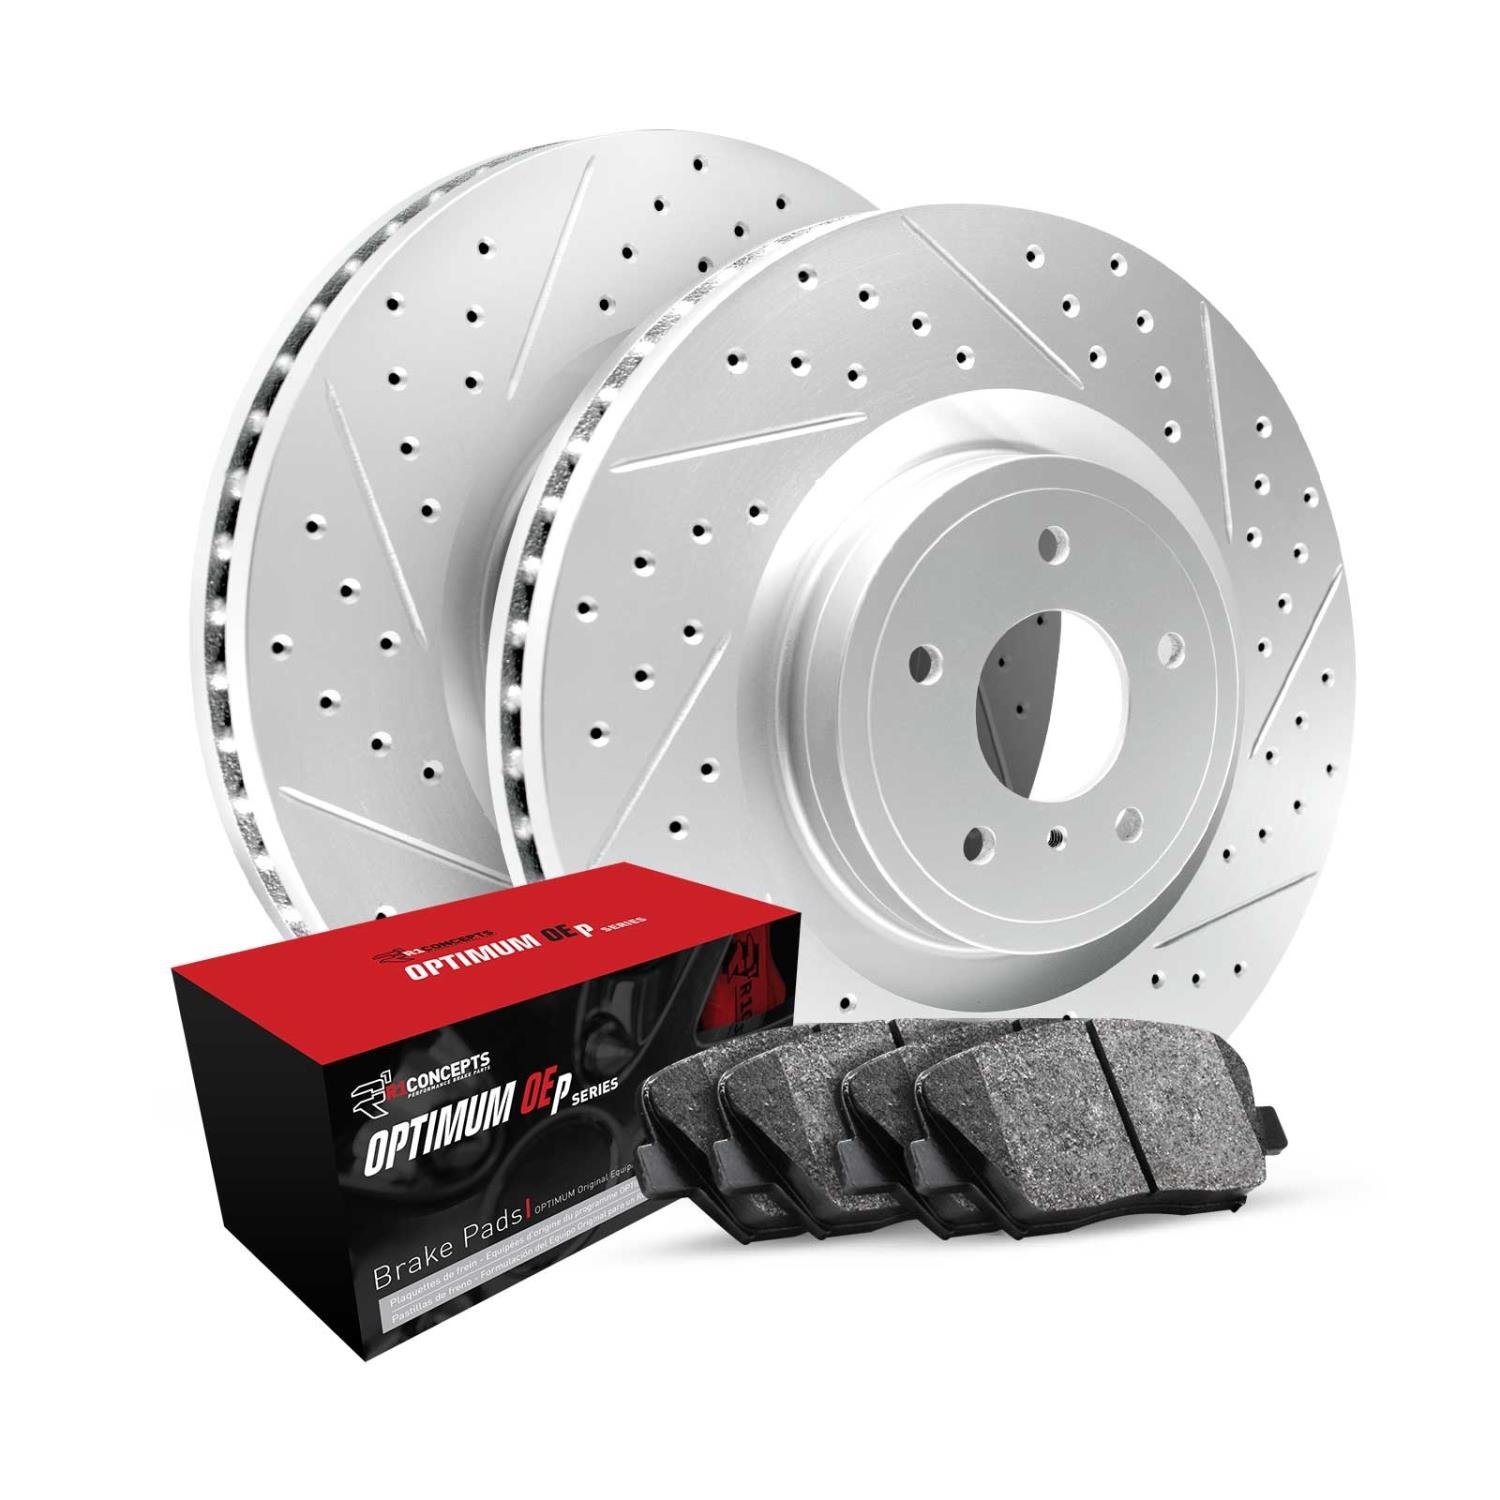 GEO-Carbon Drilled & Slotted Brake Rotor Set w/Optimum OE Pads, 2005-2012 Ford/Lincoln/Mercury/Mazda, Position: Front & Rear